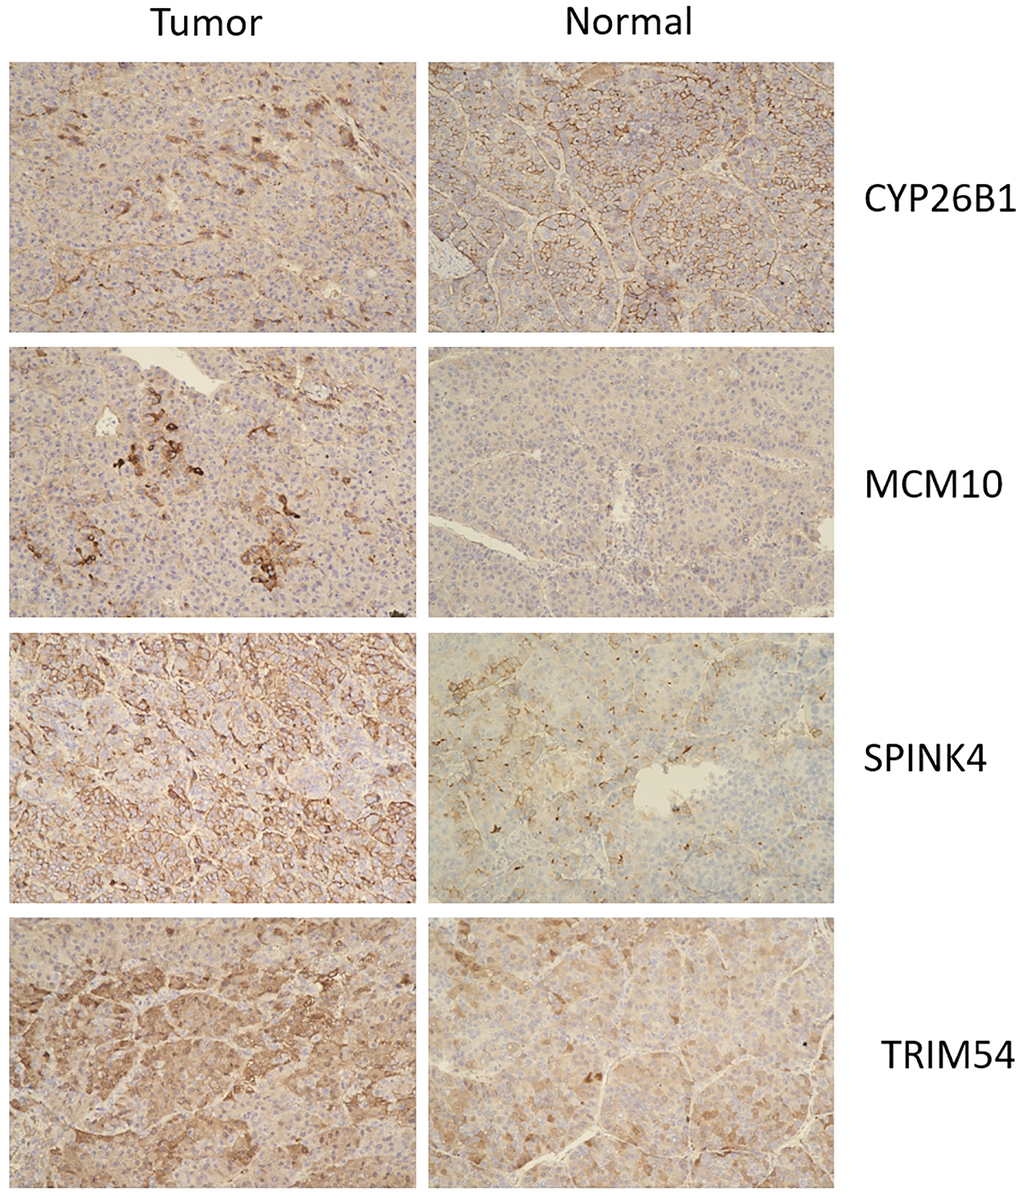 Immunohistochemistry of CYP26B1, MCM10, SPINK4, and TRIM54 expression in tumor tissue and normal tissue.